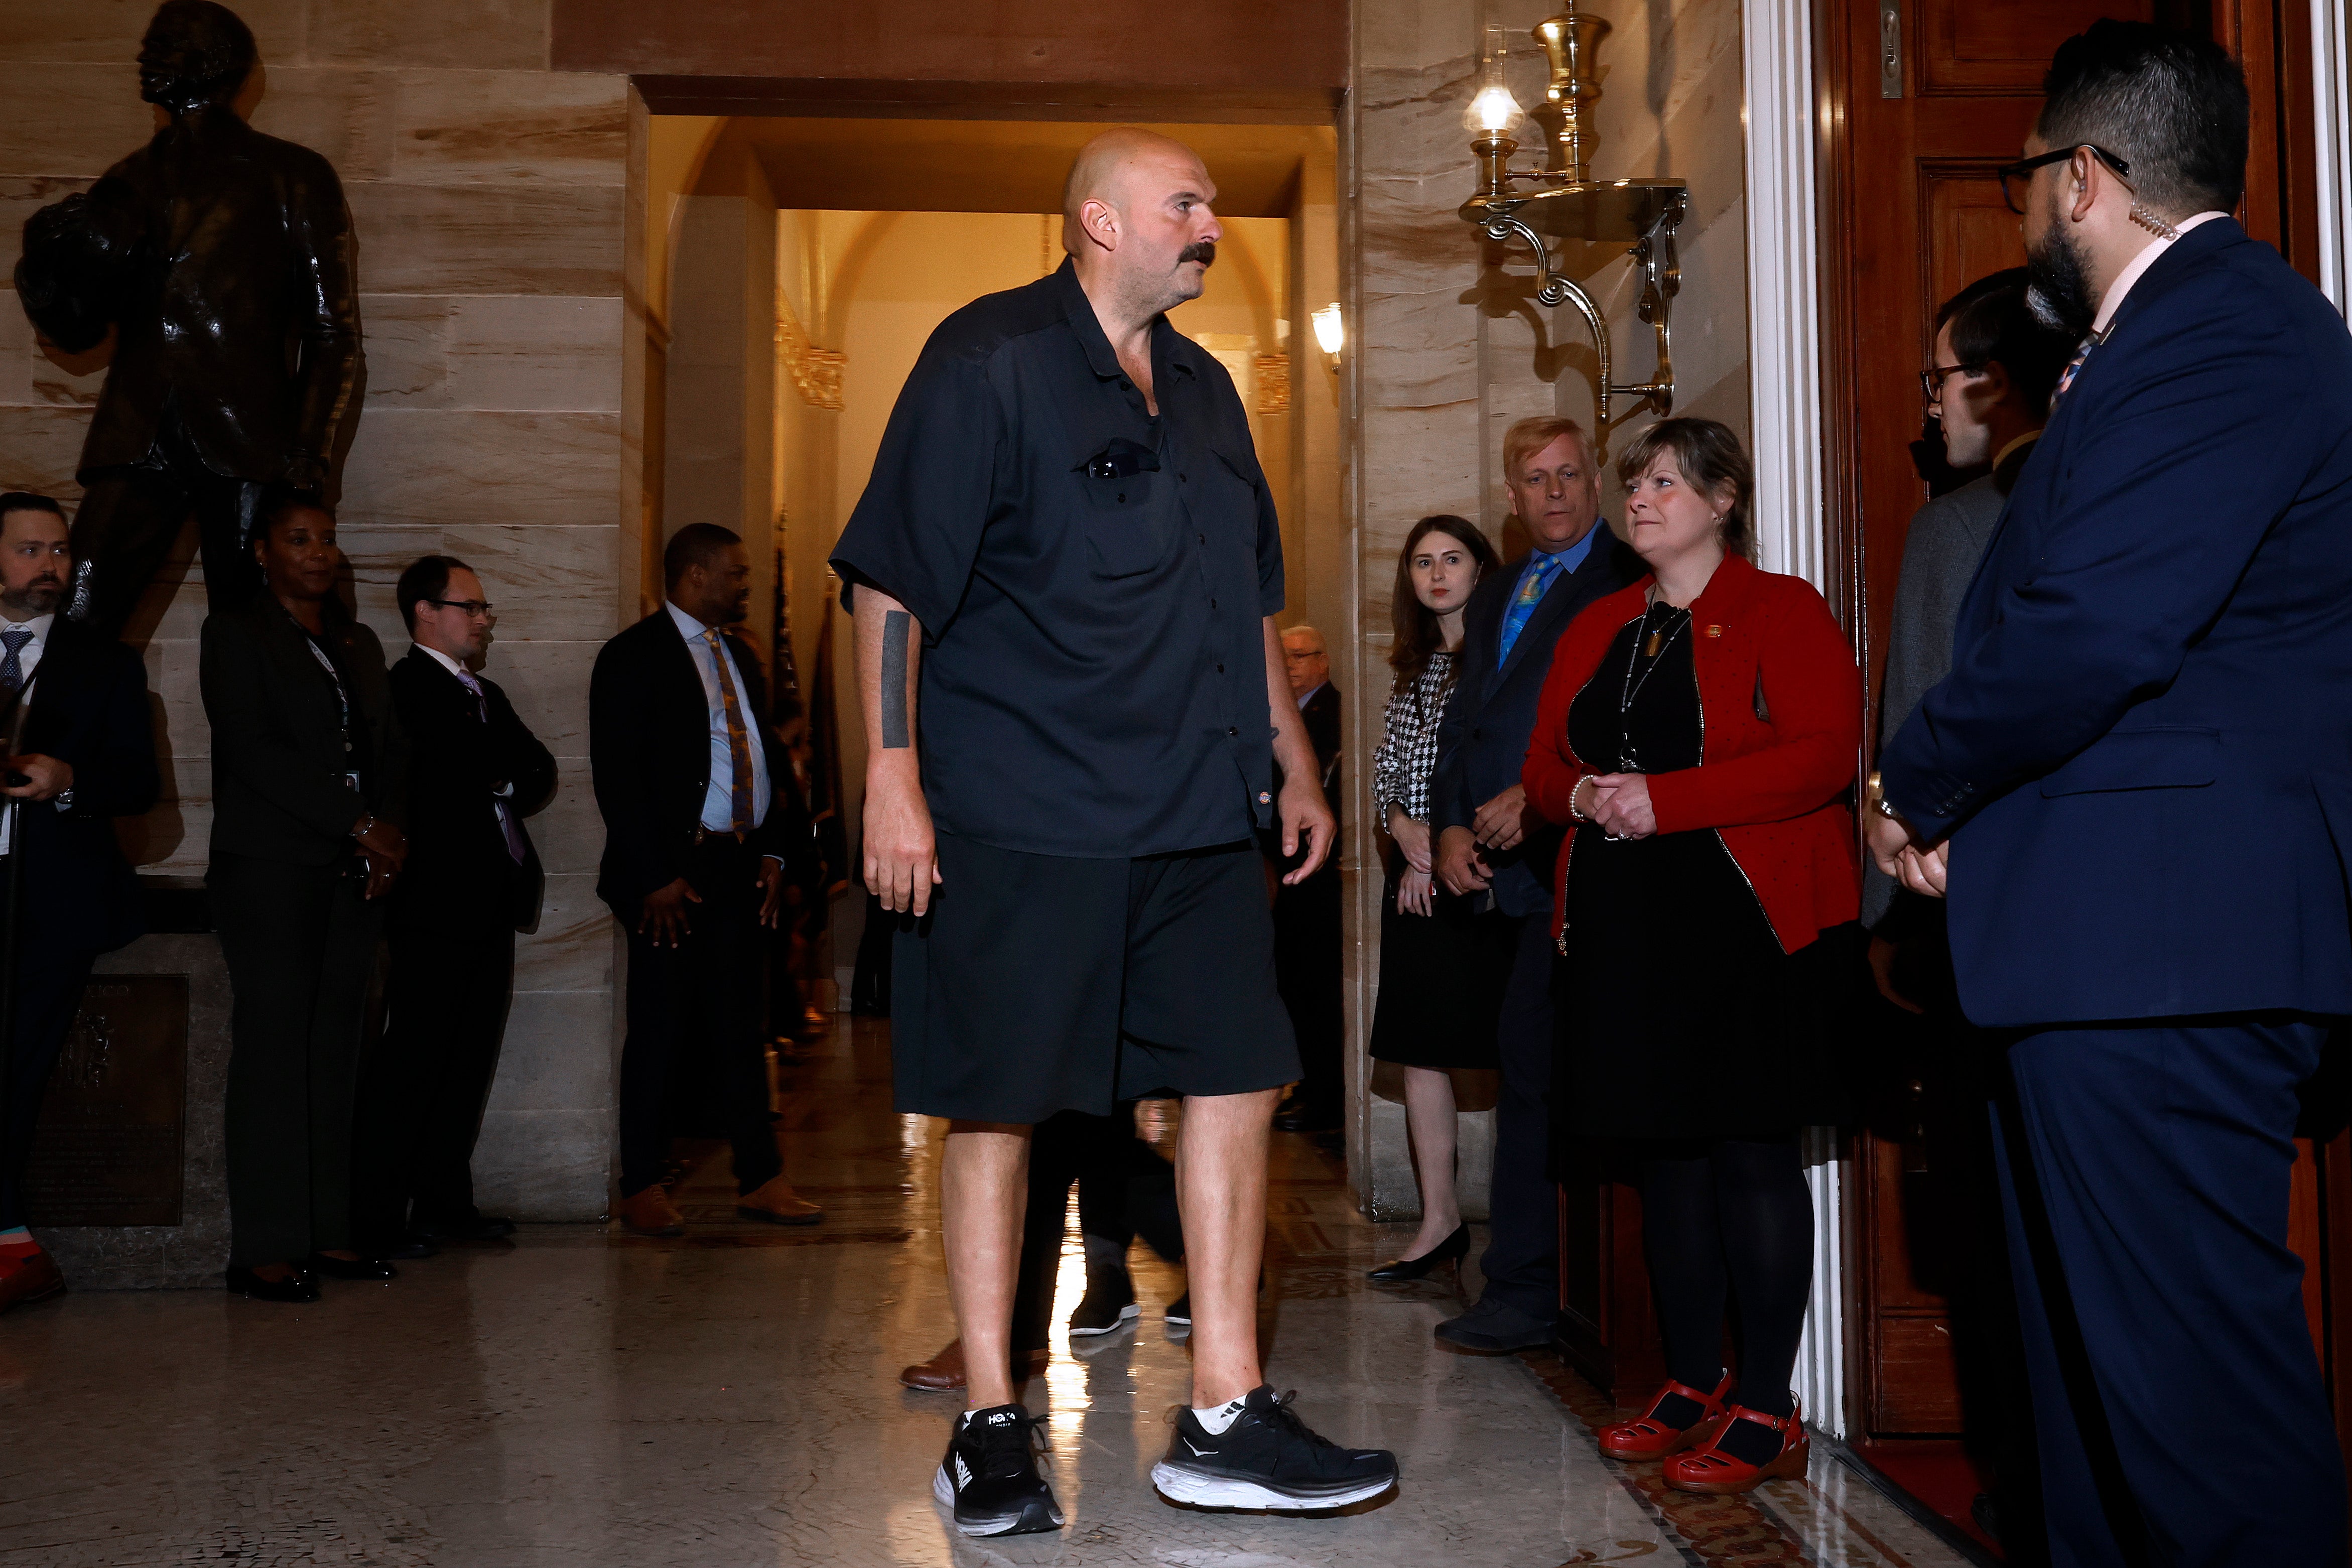 WASHINGTON, DC - SEPTEMBER 21: Sen. John Fetterman (D-PA) arrives at the Old Senate Chamber for a meeting between Ukrainian President Volodymyr Zelensky and a bipartisan group of senators at the U.S. Capitol on September 21, 2023 in Washington, DC. After attending the United Nations general assembly in New York earlier in the week, Zelensky is in Washington to meet with lawmakers and President Joe Biden about an additional $24 billion in military and humanitarian aid to Ukraine for the ongoing invasion by Russia. (Photo by Chip Somodevilla/Getty Images)